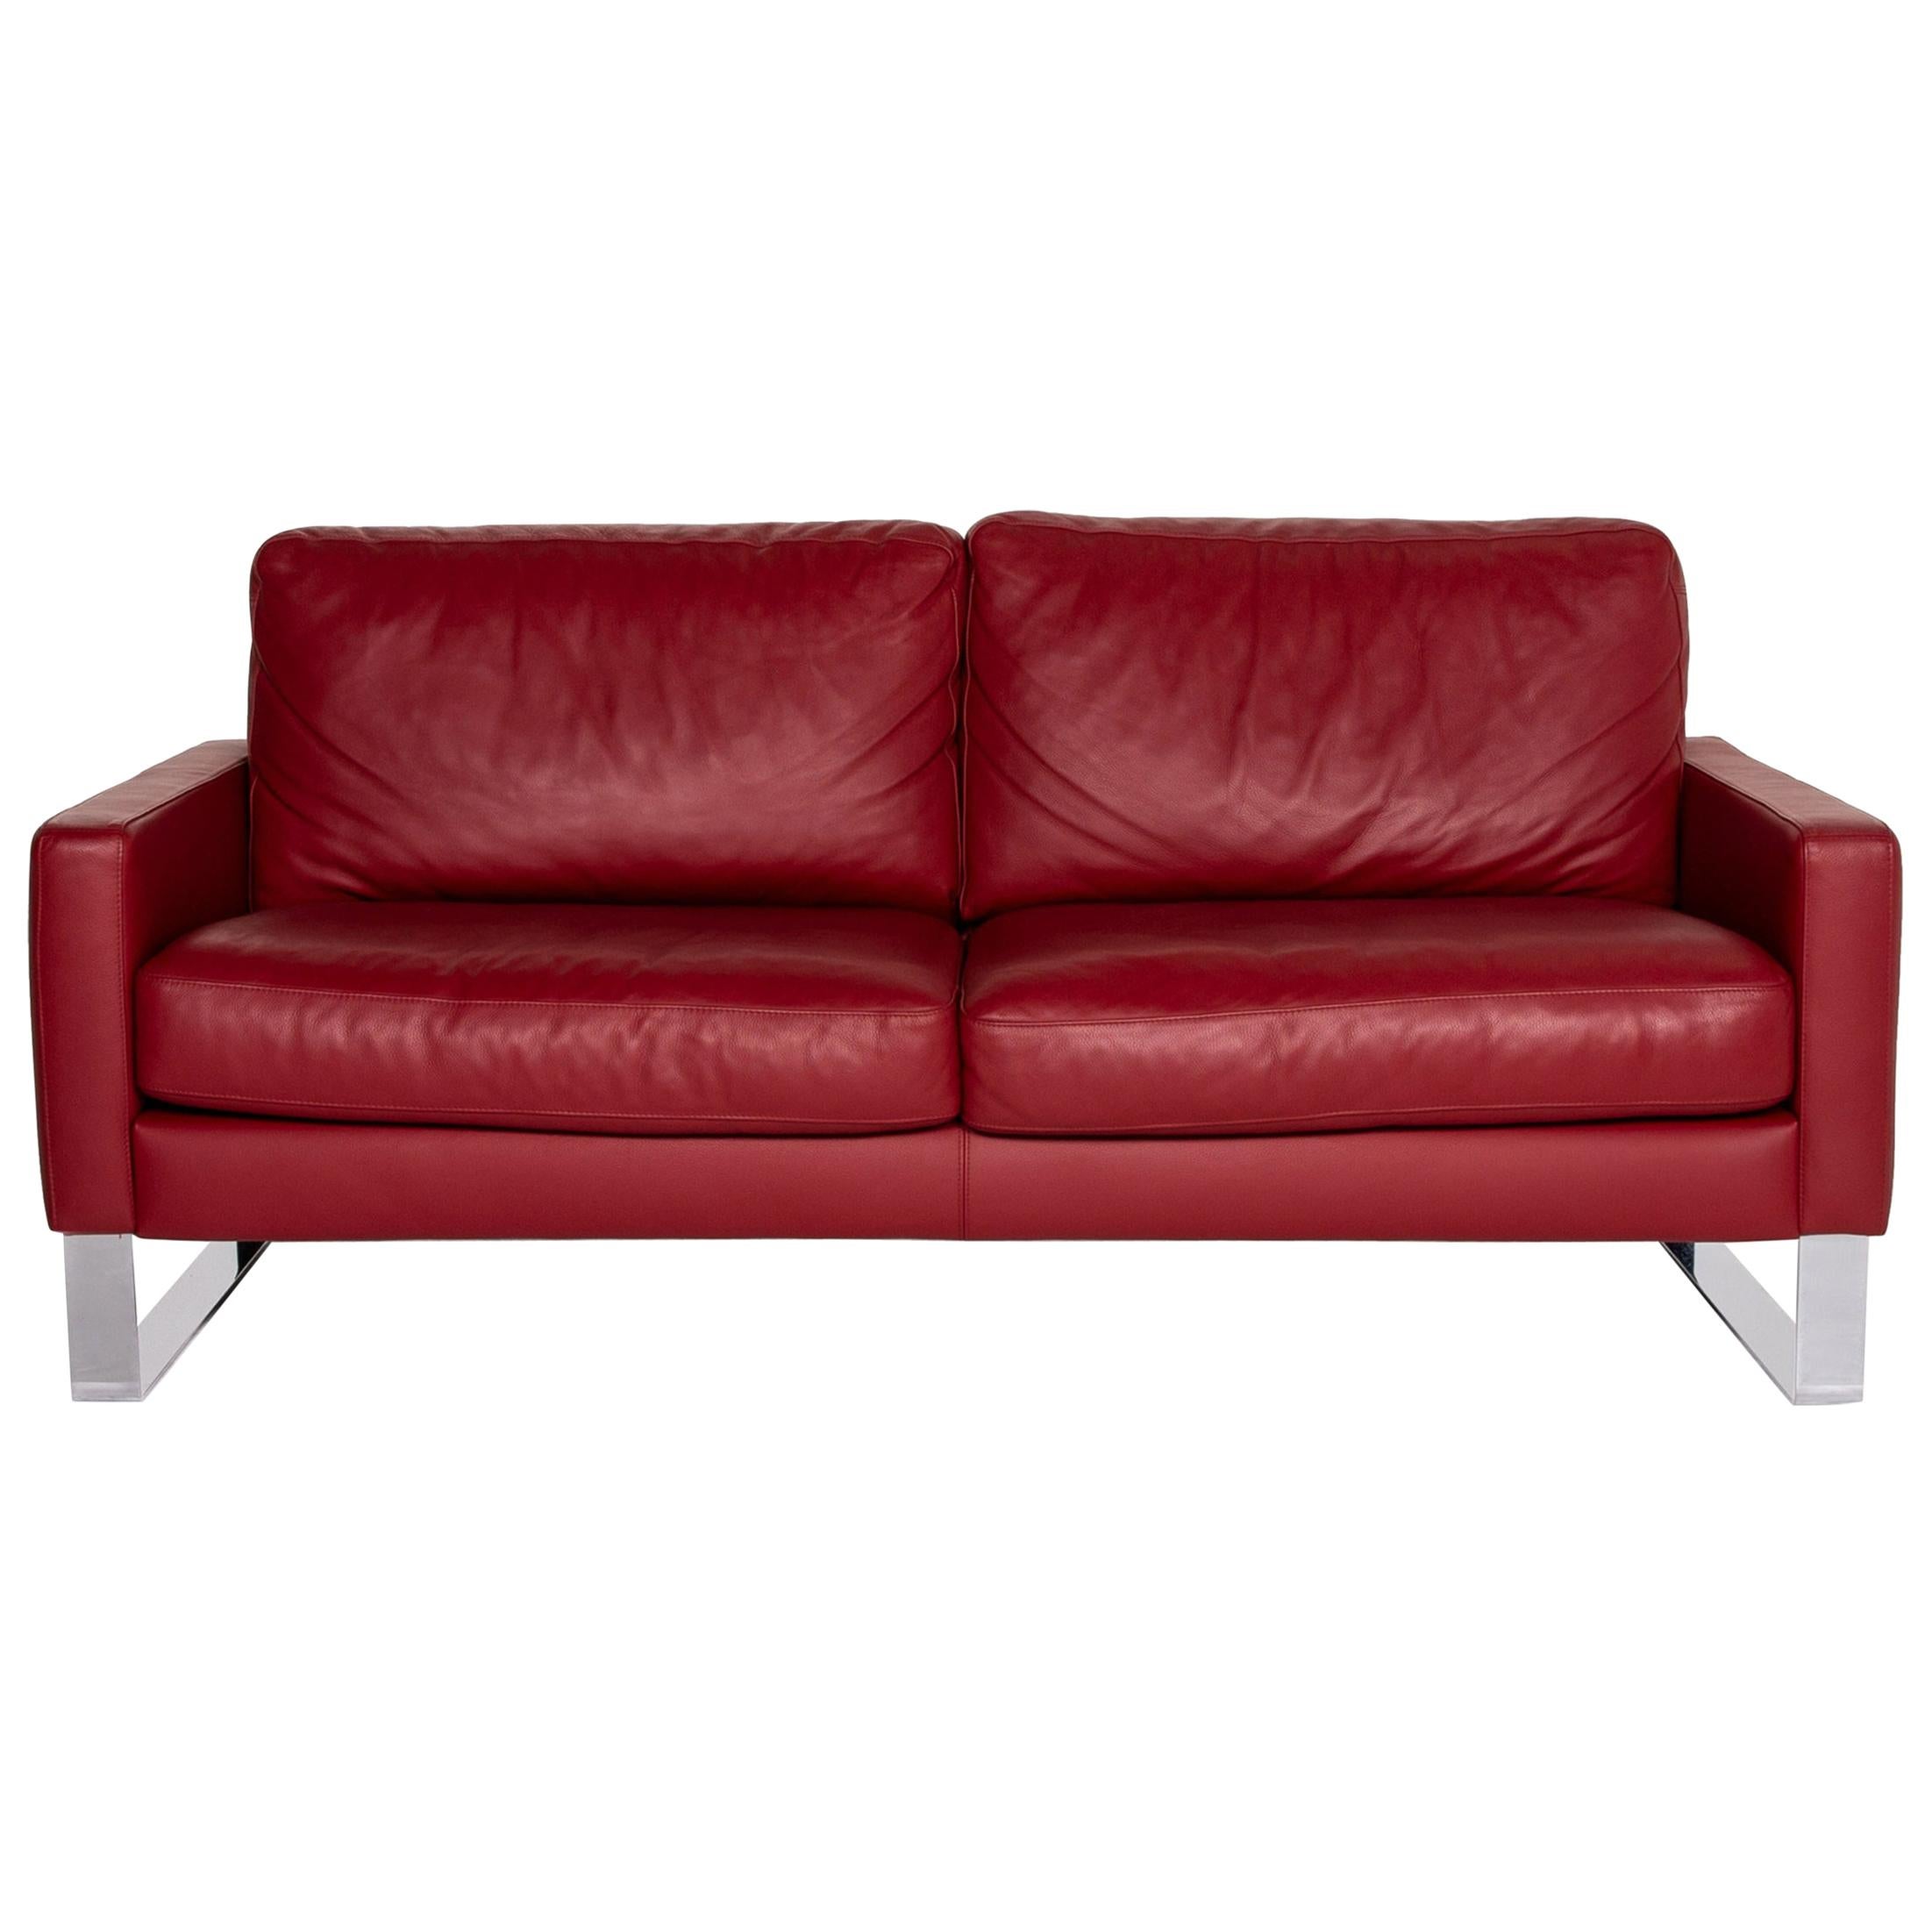 Machalke Leather Sofa Red Two-Seat Couch # 13906t